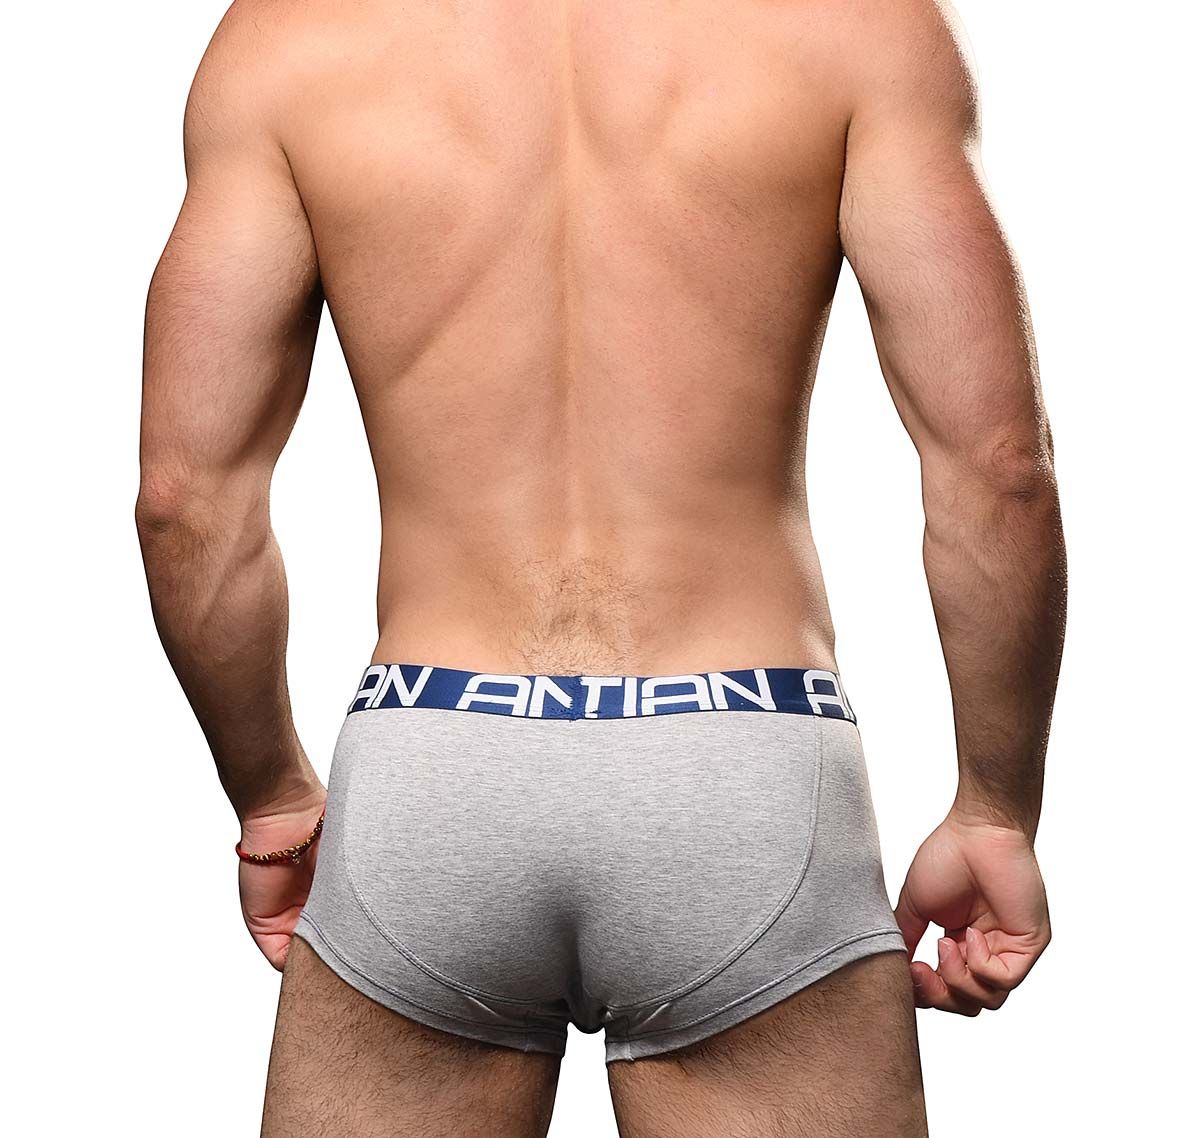 Andrew Christian Boxershorts COOLFLEX MODAL TAGLESS Boxer w/ Show-it 93025, grijs